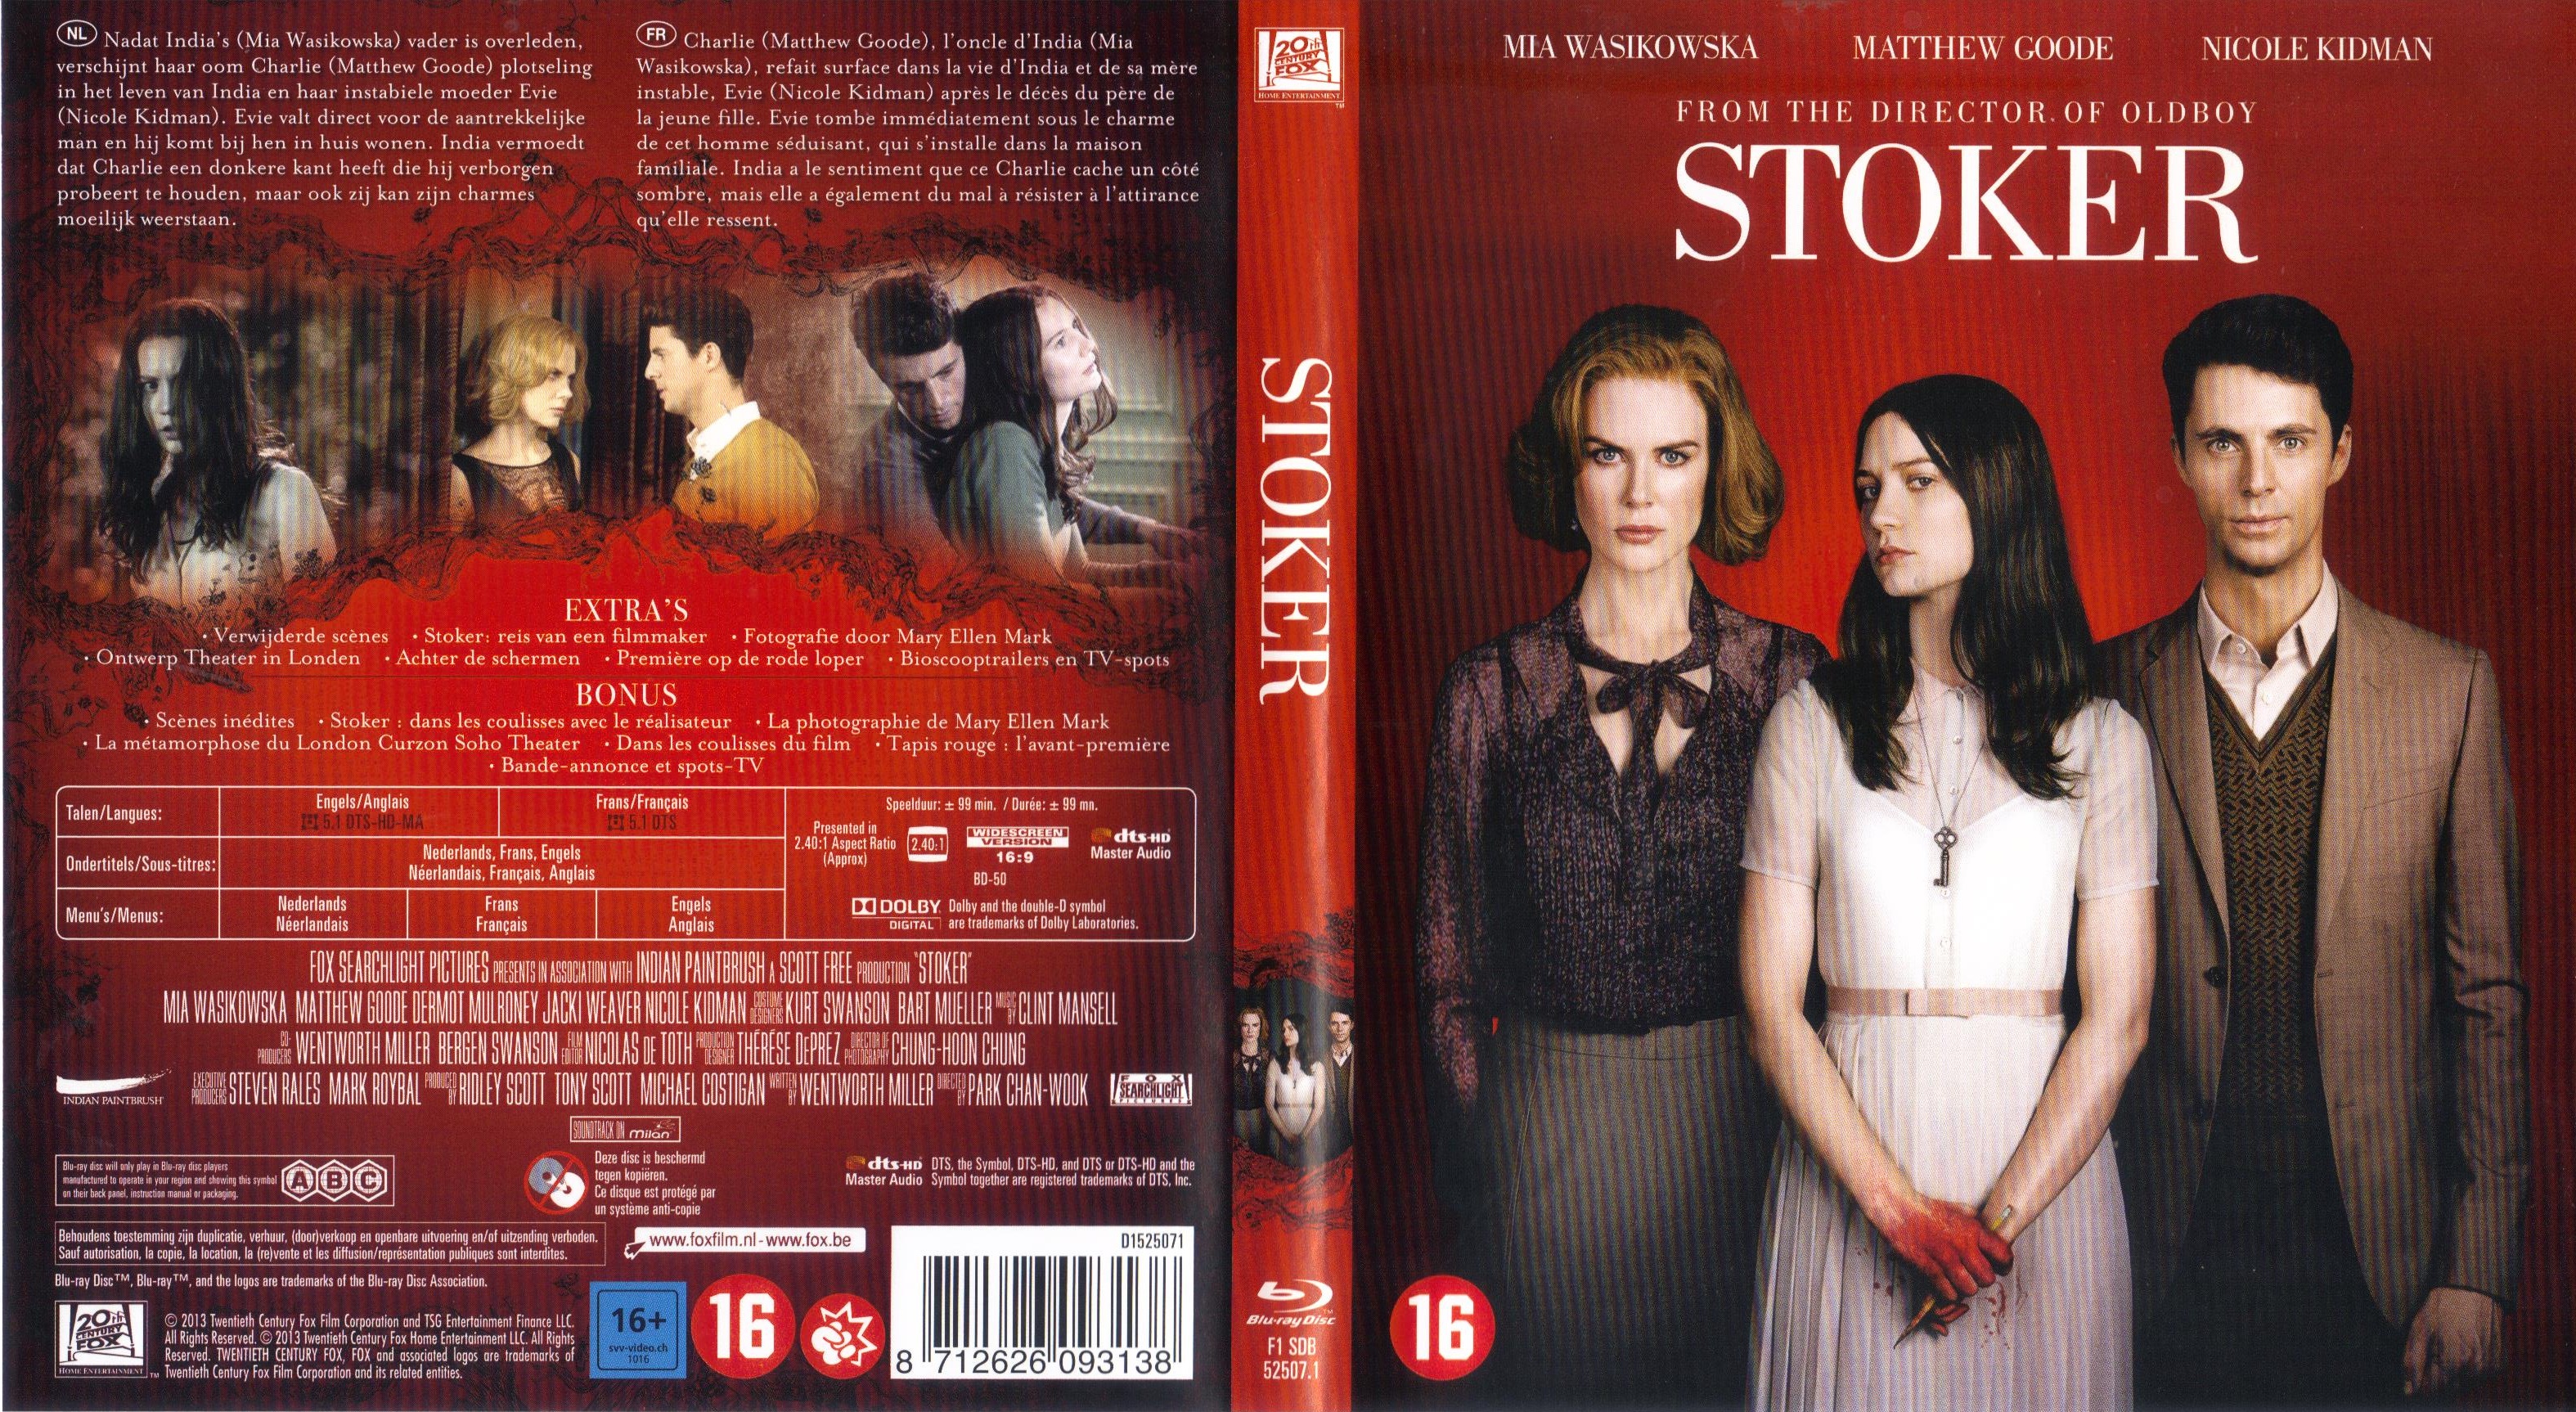 Jaquette DVD Stoker (BLU-RAY)